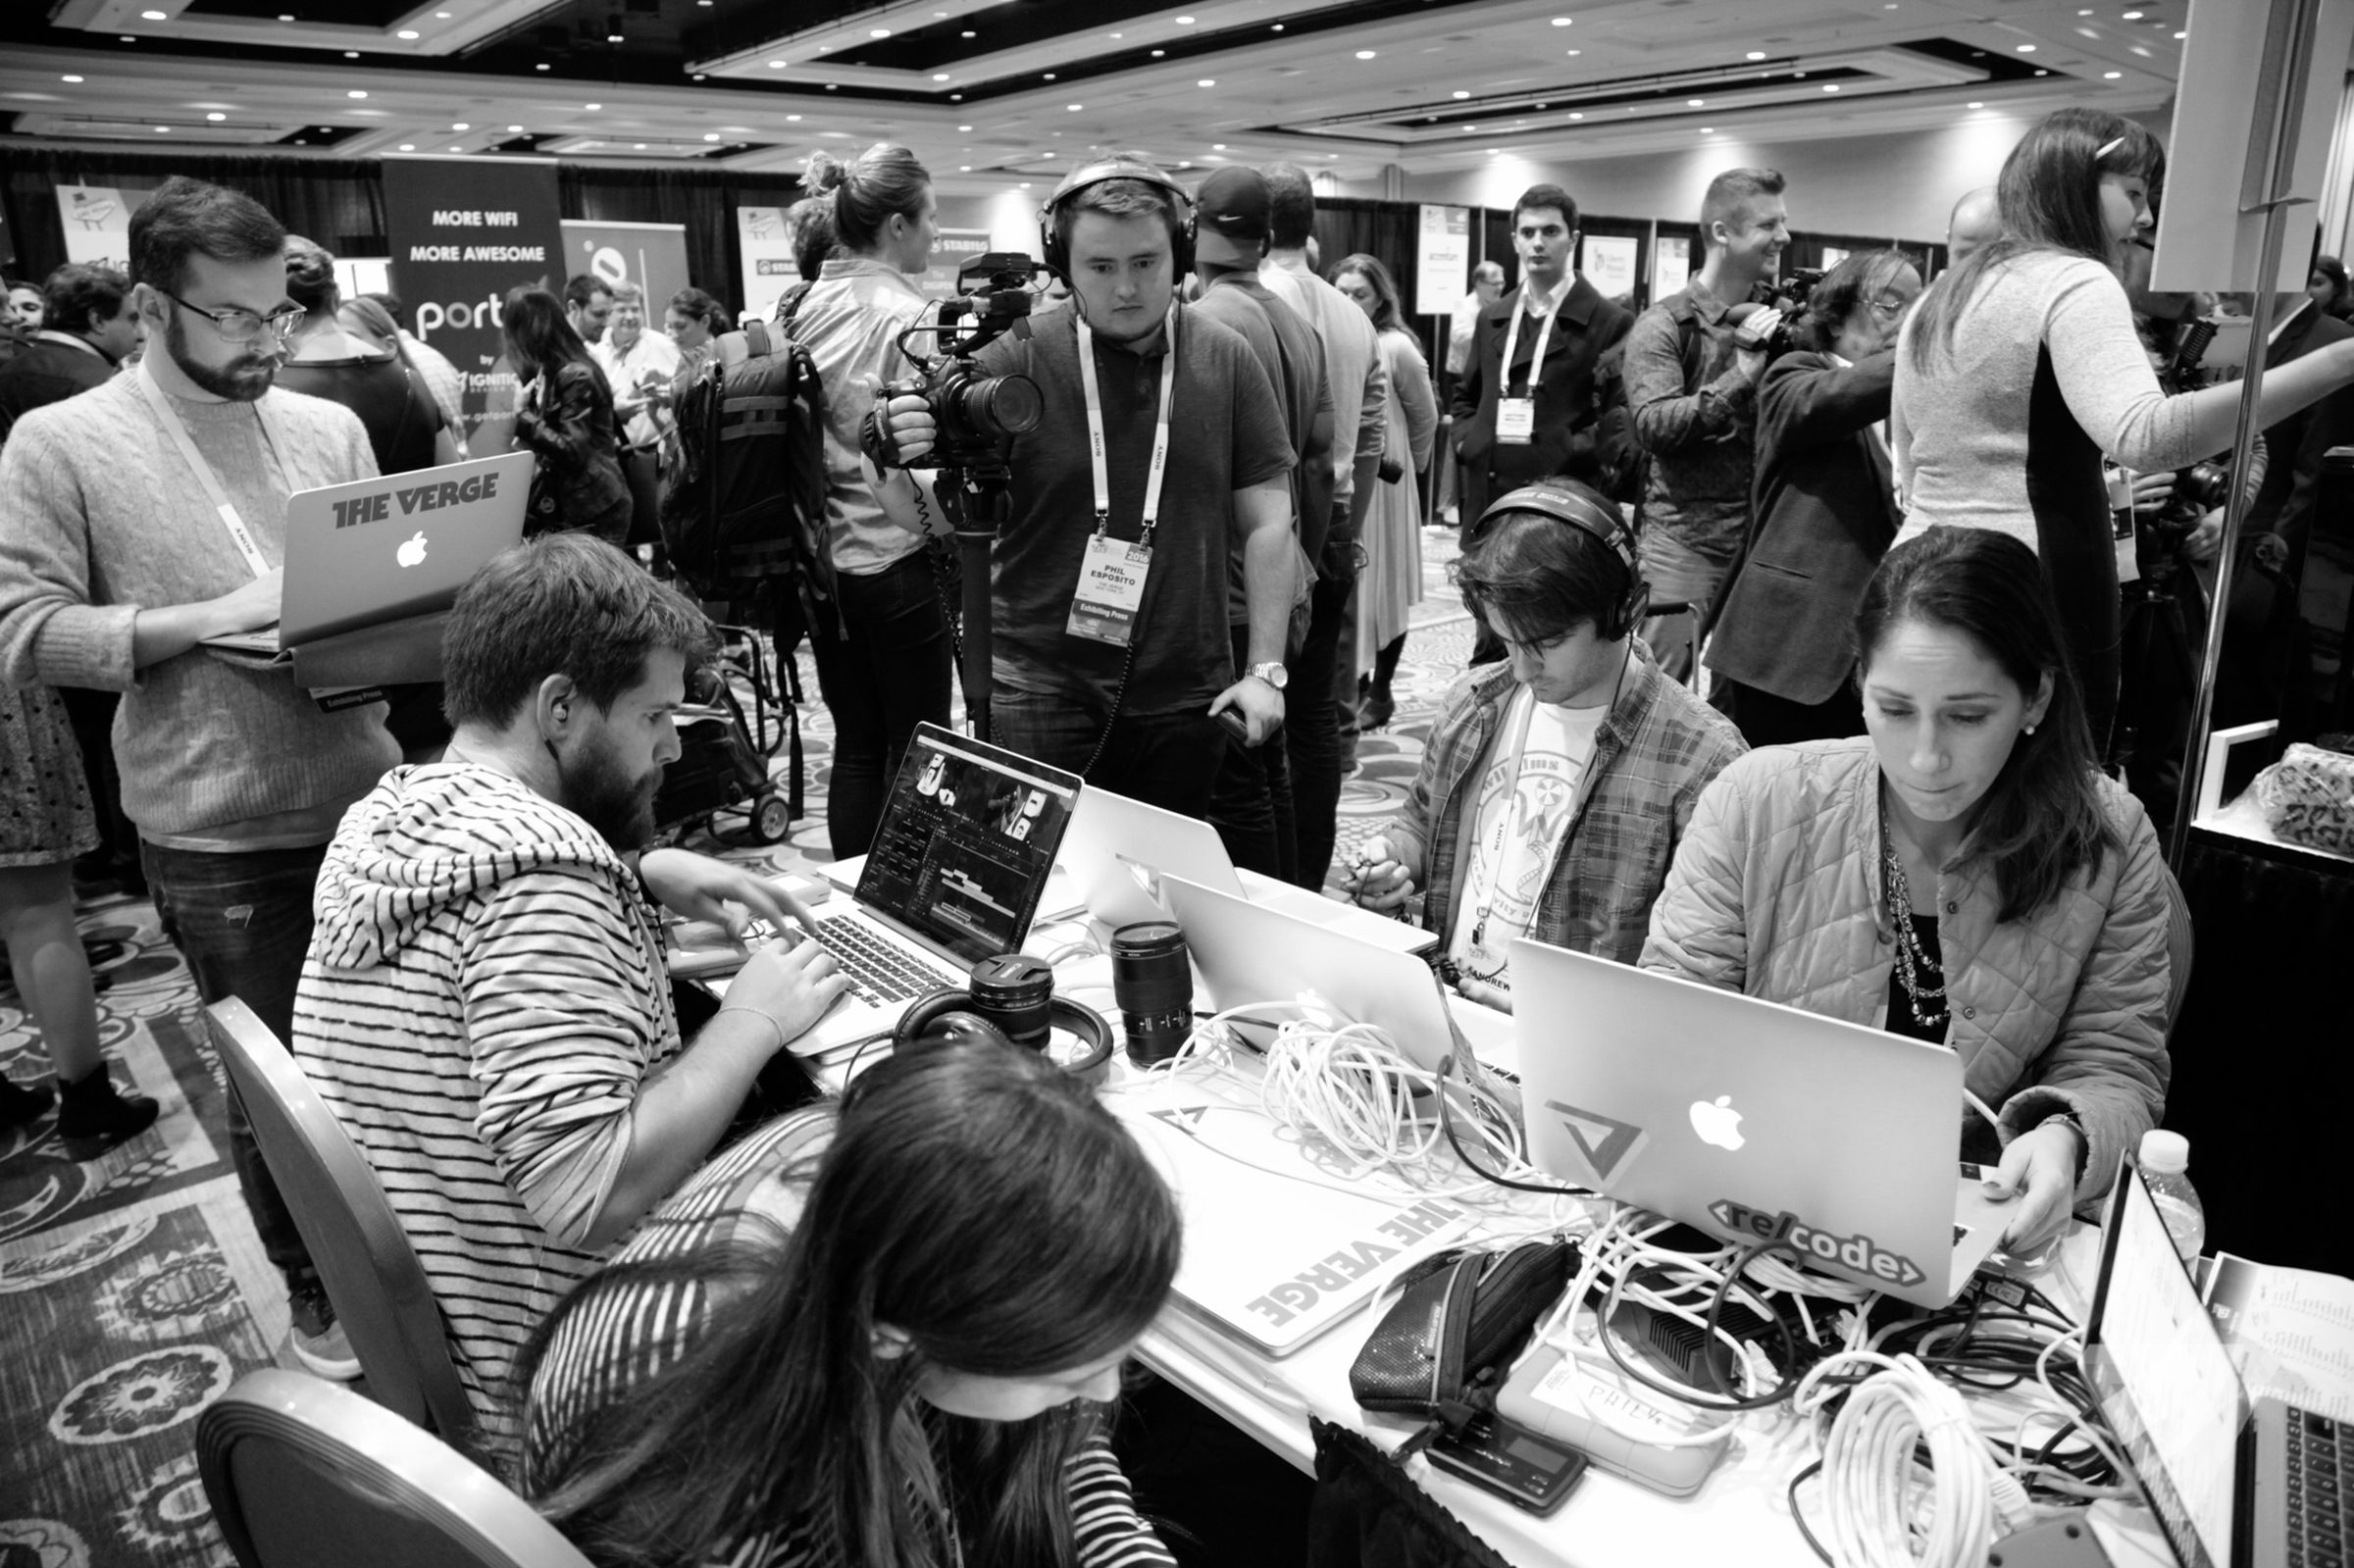 Behind the Scenes at CES 2016